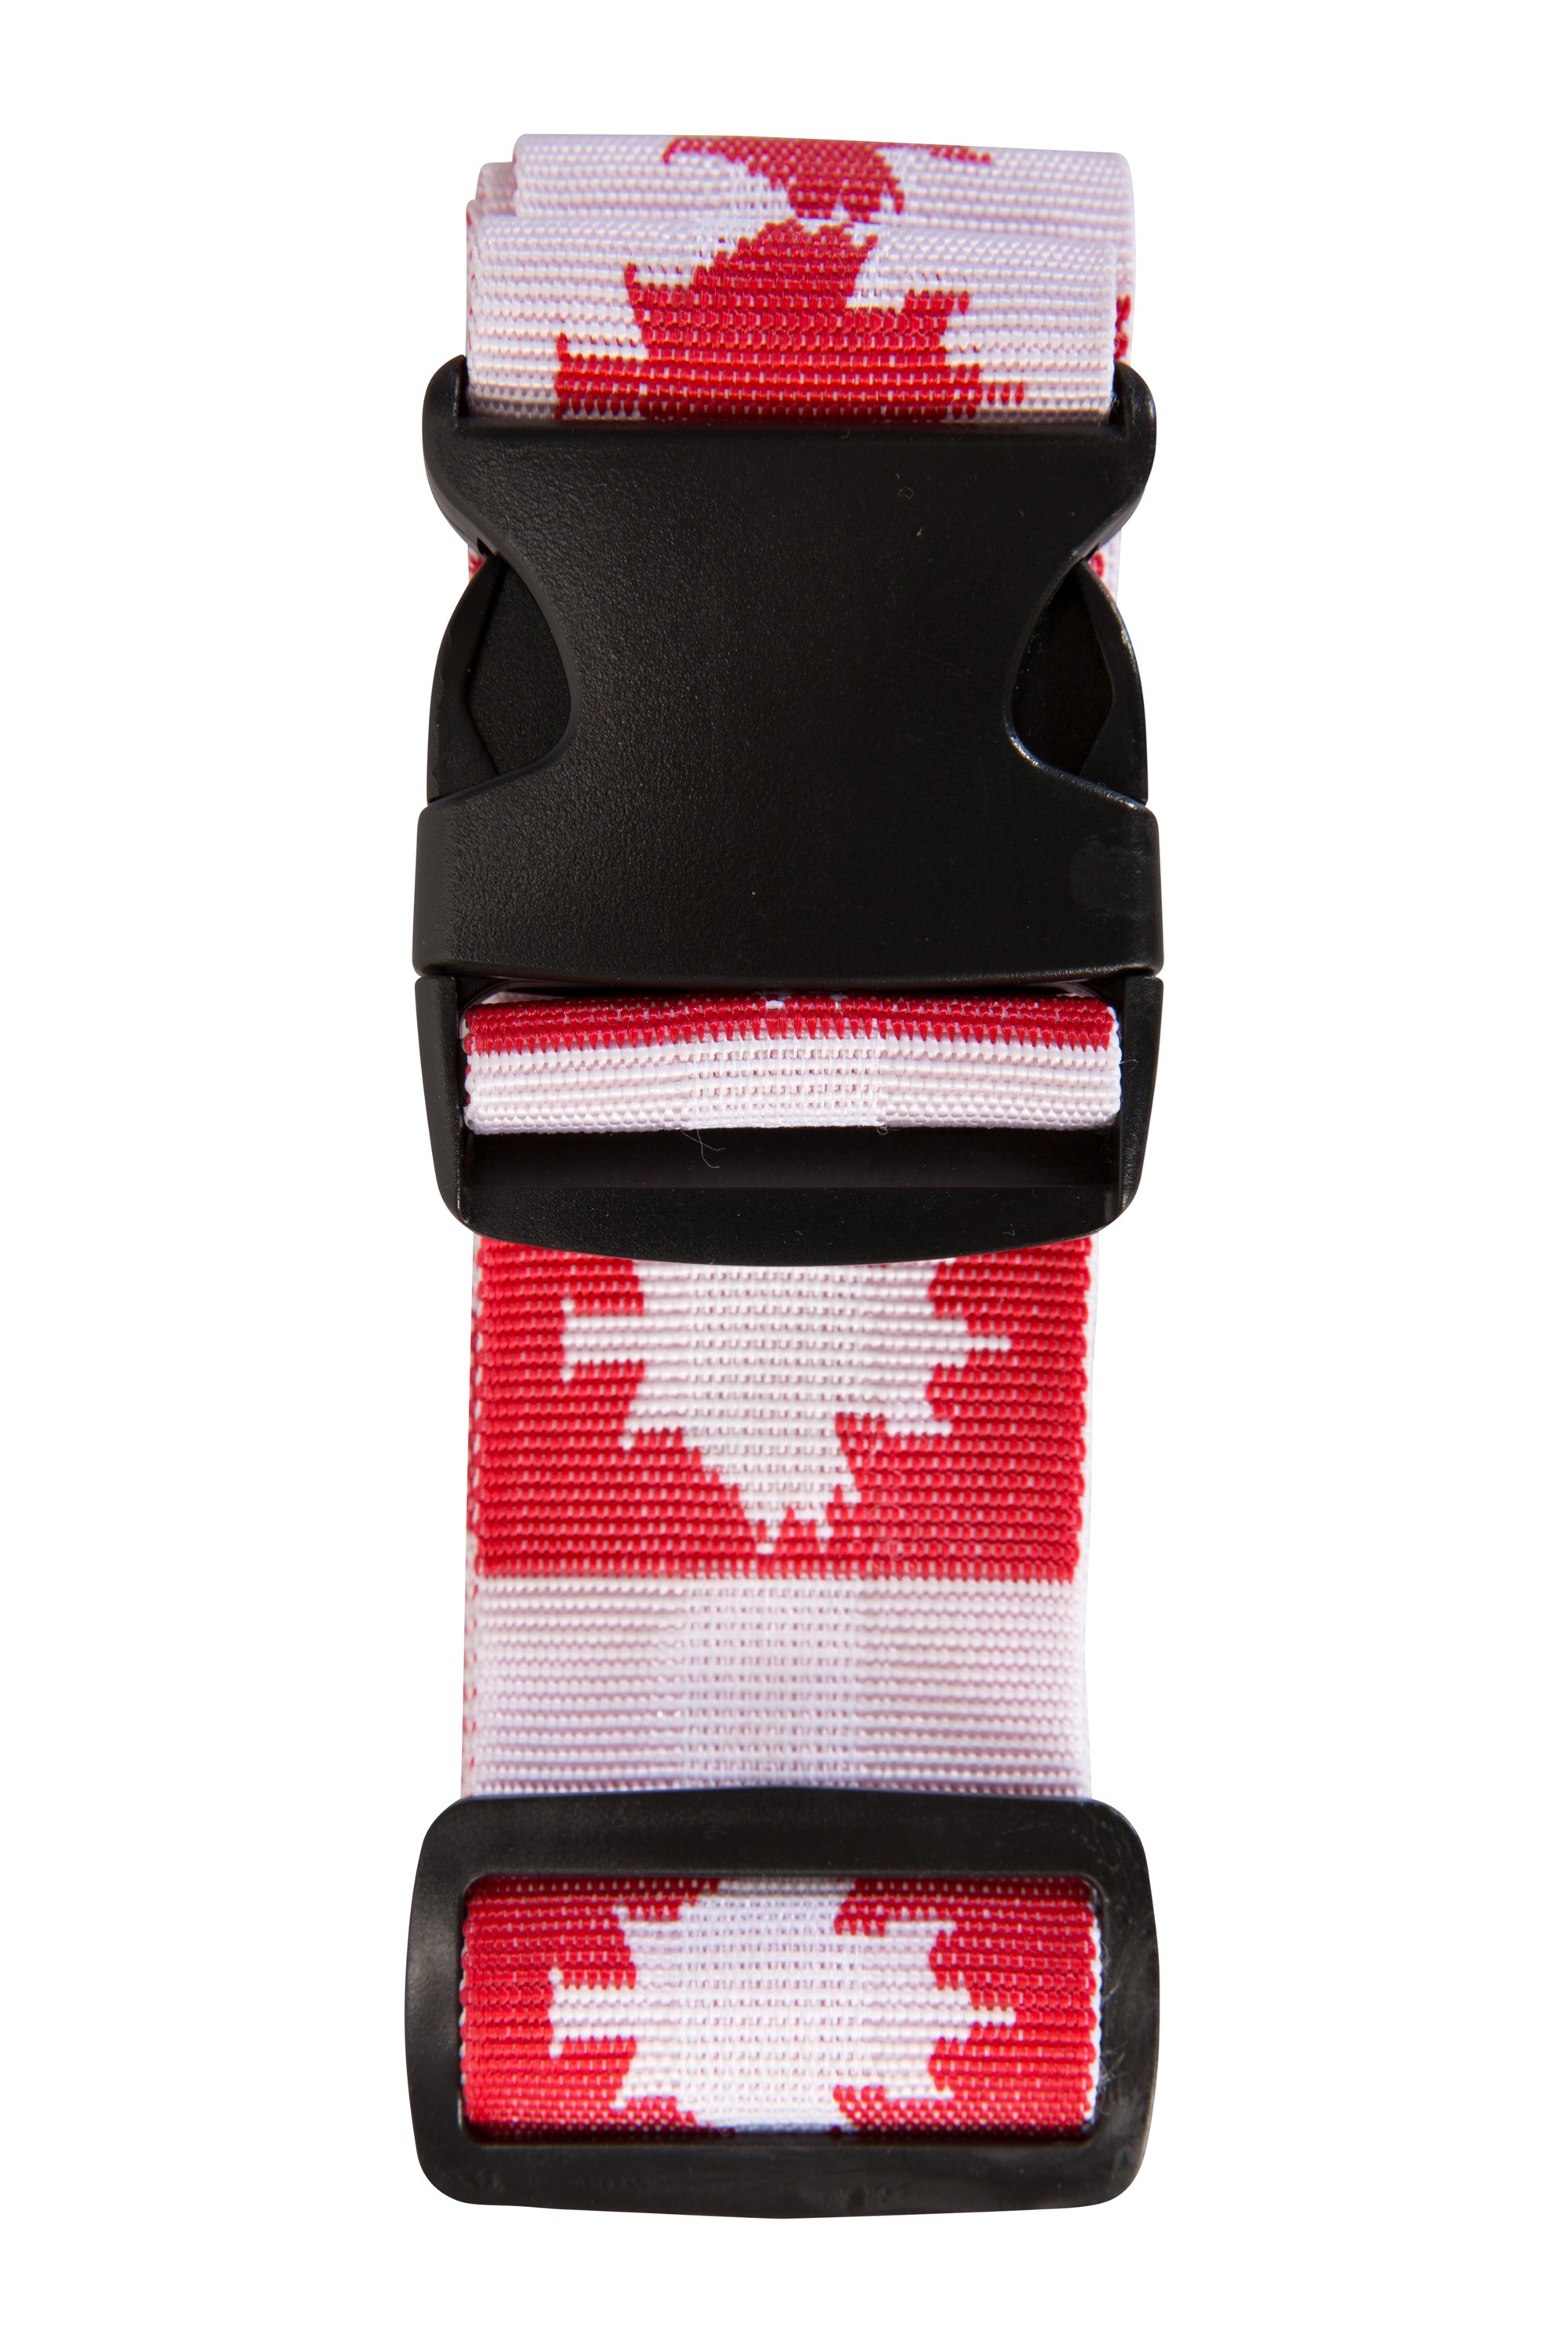 Mountain Warehouse Luggage Strap Canada Red